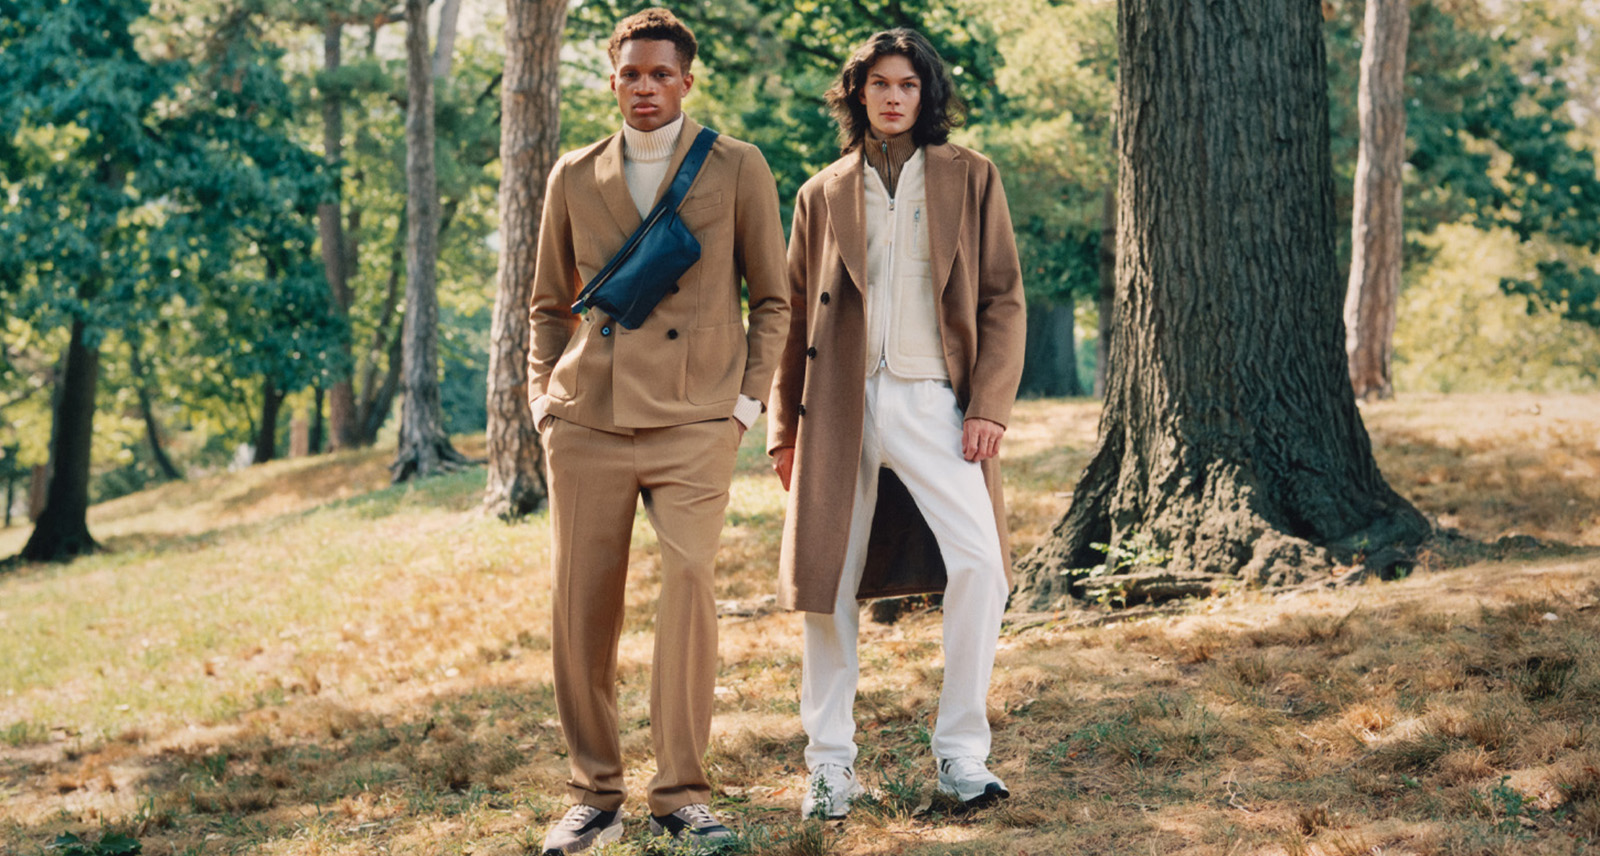 Two models in the woods; on left, the model is in a beige double-breasted suit, on right, the model is in a white shirt and pants with a beige open peacoat